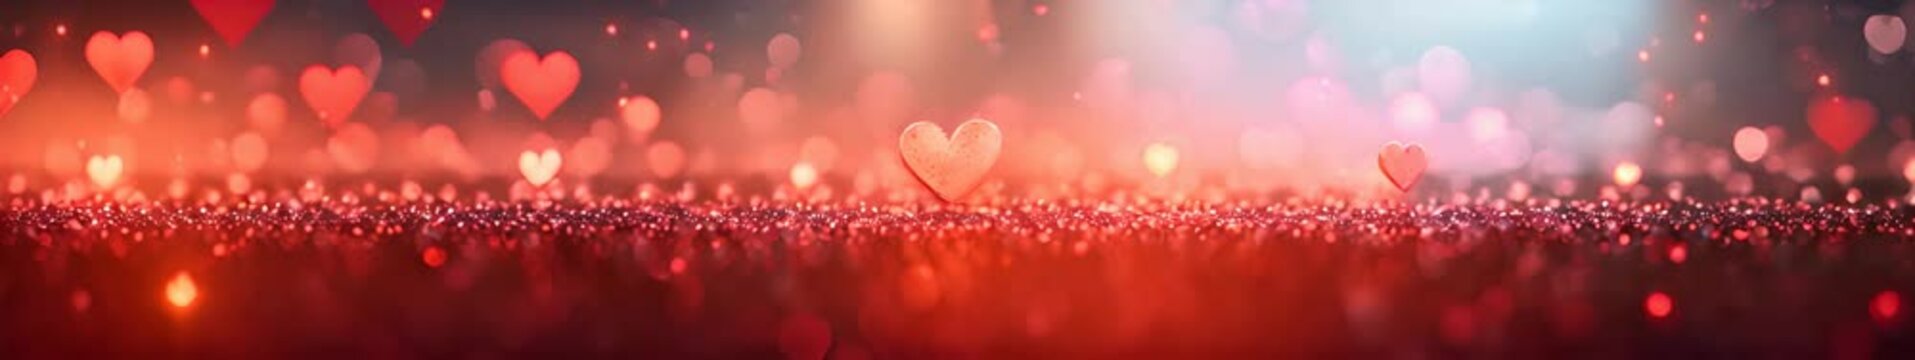 Romantic Banner with Hearts for Valentine, Dating, or Erotic Websites. Passionate Love and Intimacy Concept. Beautiful Design for Relationships, Sensual Moments, and Affectionate Connections. 